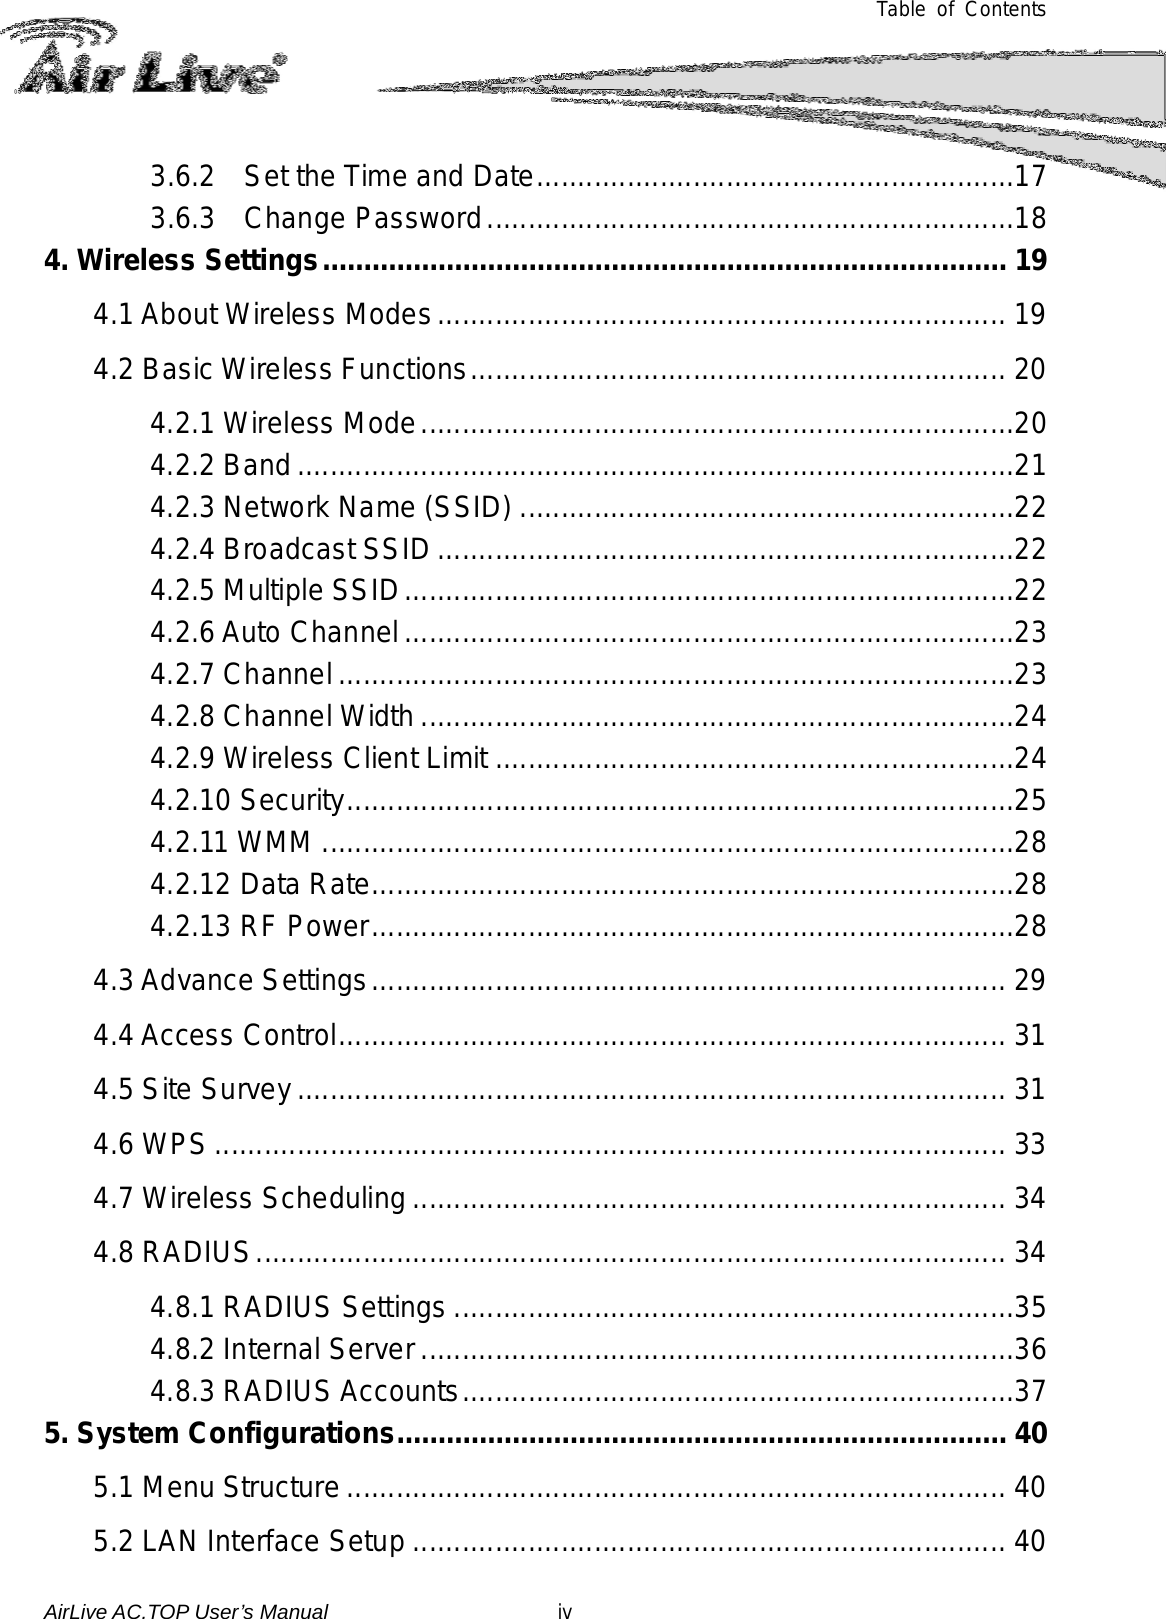  Table of Contents 3.6.2 Set the Time and Date ..........................................................17 3.6.3  Change Password ................................................................18 4. Wireless Settings ................................................................................... 19 4.1 About Wireless Modes ..................................................................... 19 4.2 Basic Wireless Functions ................................................................. 20 4.2.1 Wireless Mode ........................................................................20 4.2.2 Band .......................................................................................21 4.2.3 Network Name (SSID) ............................................................22 4.2.4 Broadcast SSID ......................................................................22 4.2.5 Multiple SSID ..........................................................................22 4.2.6 Auto Channel ..........................................................................23 4.2.7 Channel ..................................................................................23 4.2.8 Channel Width ........................................................................24 4.2.9 Wireless Client Limit ...............................................................24 4.2.10 Security .................................................................................25 4.2.11 WMM ....................................................................................28 4.2.12 Data Rate ..............................................................................28 4.2.13 RF Power ..............................................................................28 4.3 Advance Settings ............................................................................. 29 4.4 Access Control ................................................................................. 31 4.5 Site Survey ...................................................................................... 31 4.6 WPS ................................................................................................ 33 4.7 Wireless Scheduling ........................................................................ 34 4.8 RADIUS ........................................................................................... 34 4.8.1 RADIUS Settings ....................................................................35 4.8.2 Internal Server ........................................................................36 4.8.3 RADIUS Accounts ...................................................................37 5. System Configurations .......................................................................... 40 5.1 Menu Structure ................................................................................ 40 5.2 LAN Interface Setup ........................................................................ 40 AirLive AC.TOP User’s Manual                      iv 